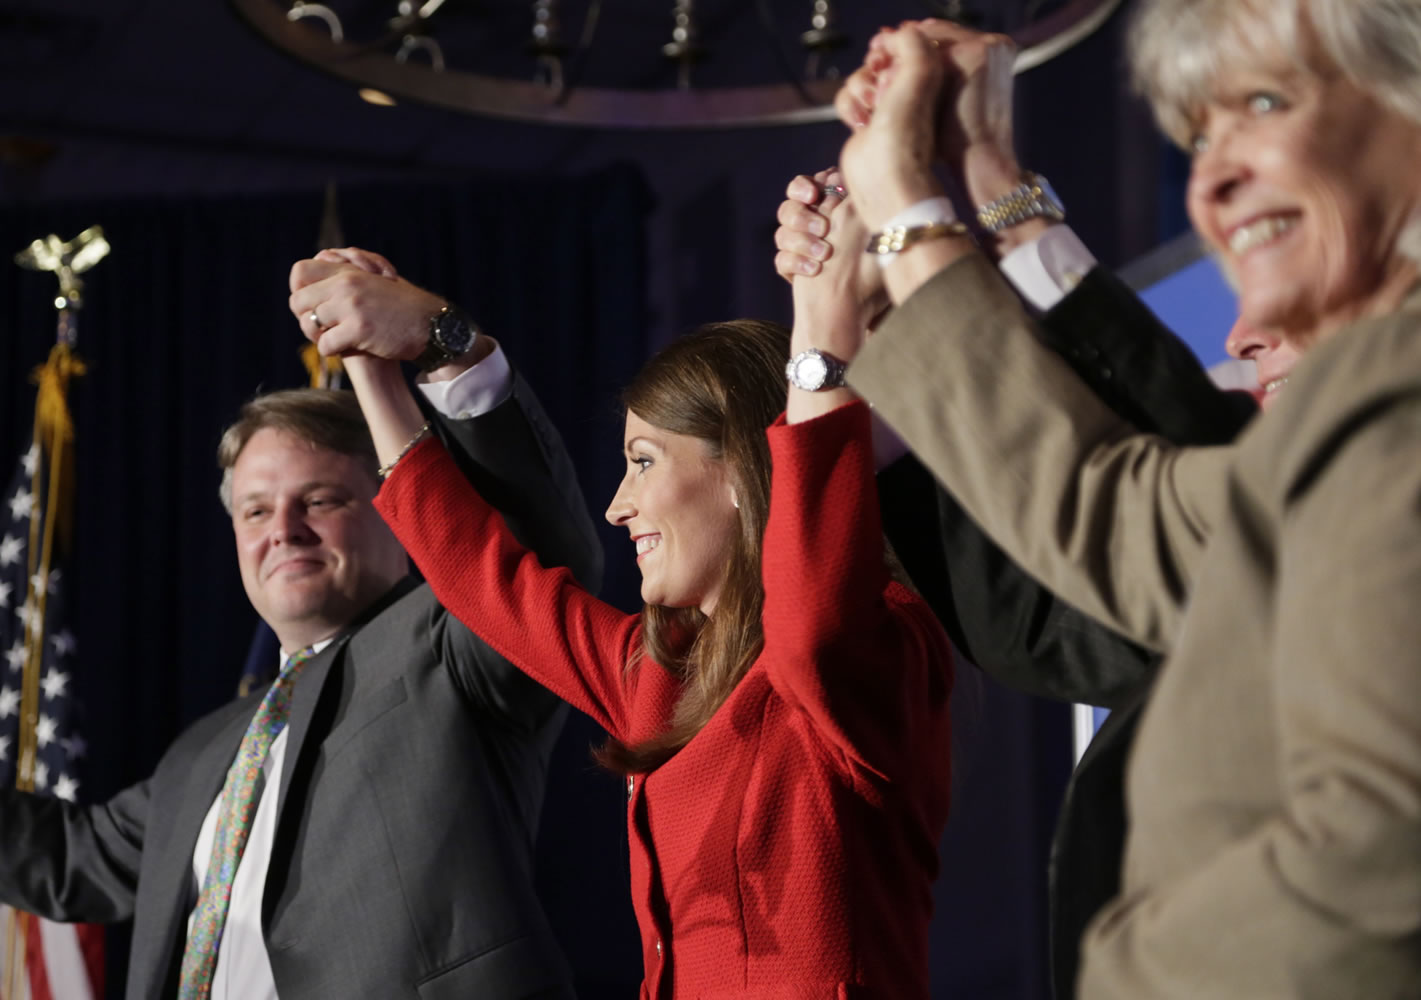 U.S. Senate candidate Alison Lundergan Grimes, center, celebrated on stage with husband Andrew Grimes, left, Gov. Steve Beshear, second from right, and former Gov.